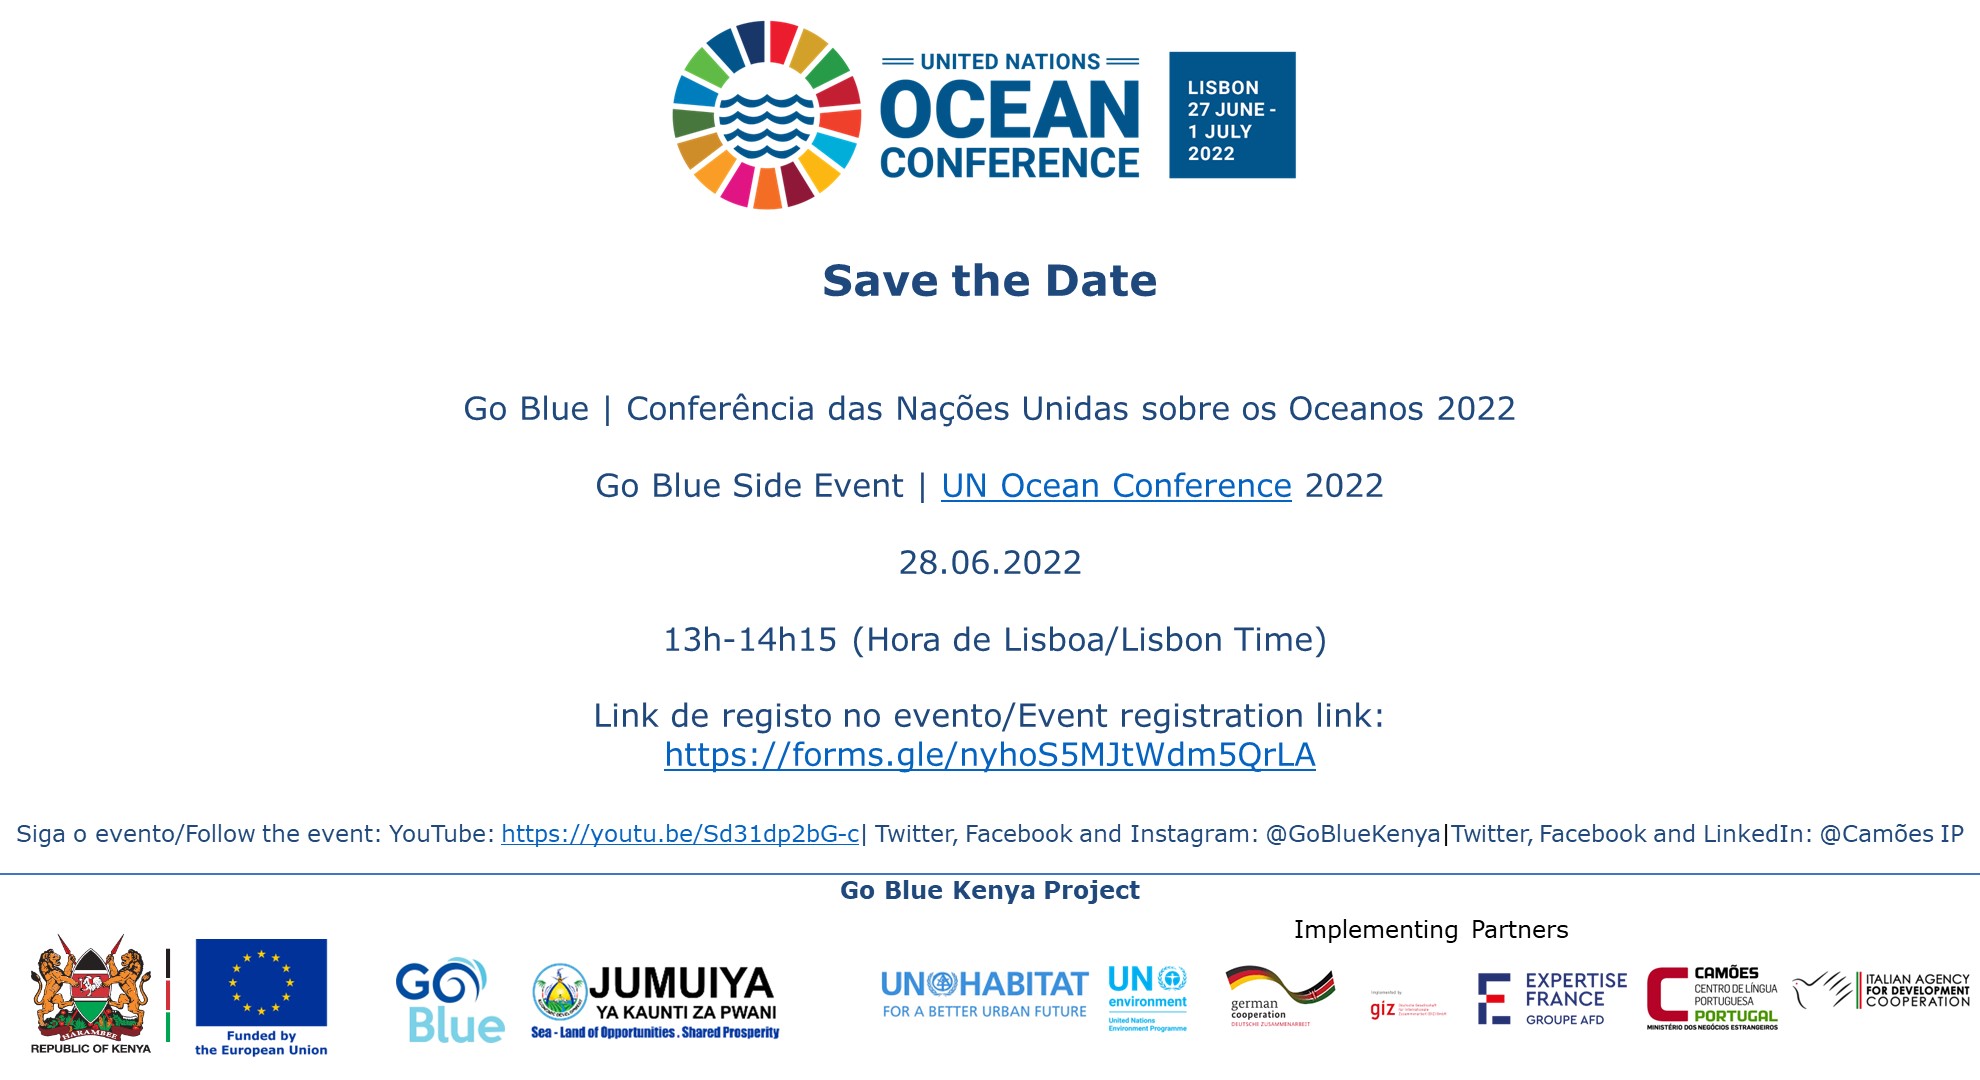 Go Blue Kenya Project Side Event at the United Nations Oceans Conference 2022